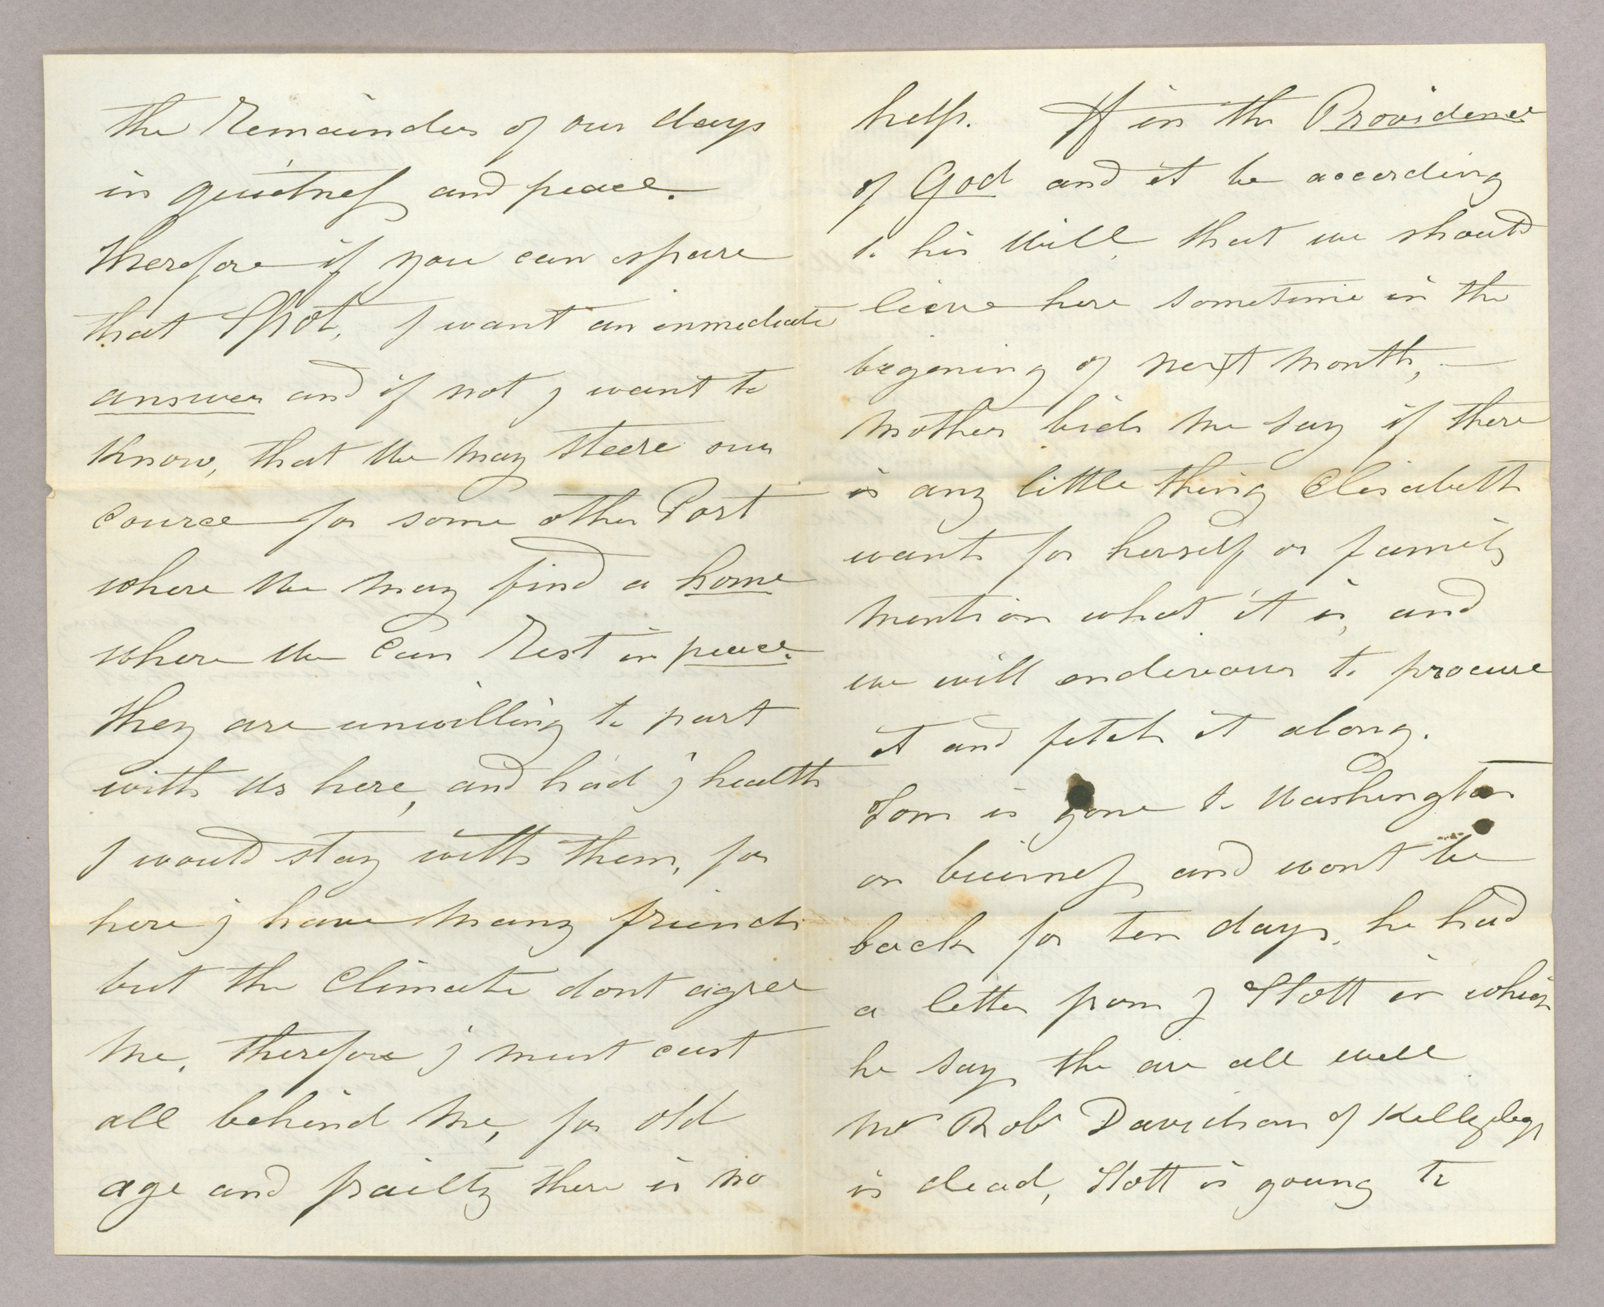 Letter. R[obert] Brownlee, House of Refuge, Cincinnati, Ohio, to "Dear Johny" [John E. Brownlee], n. p., Pages 2-3